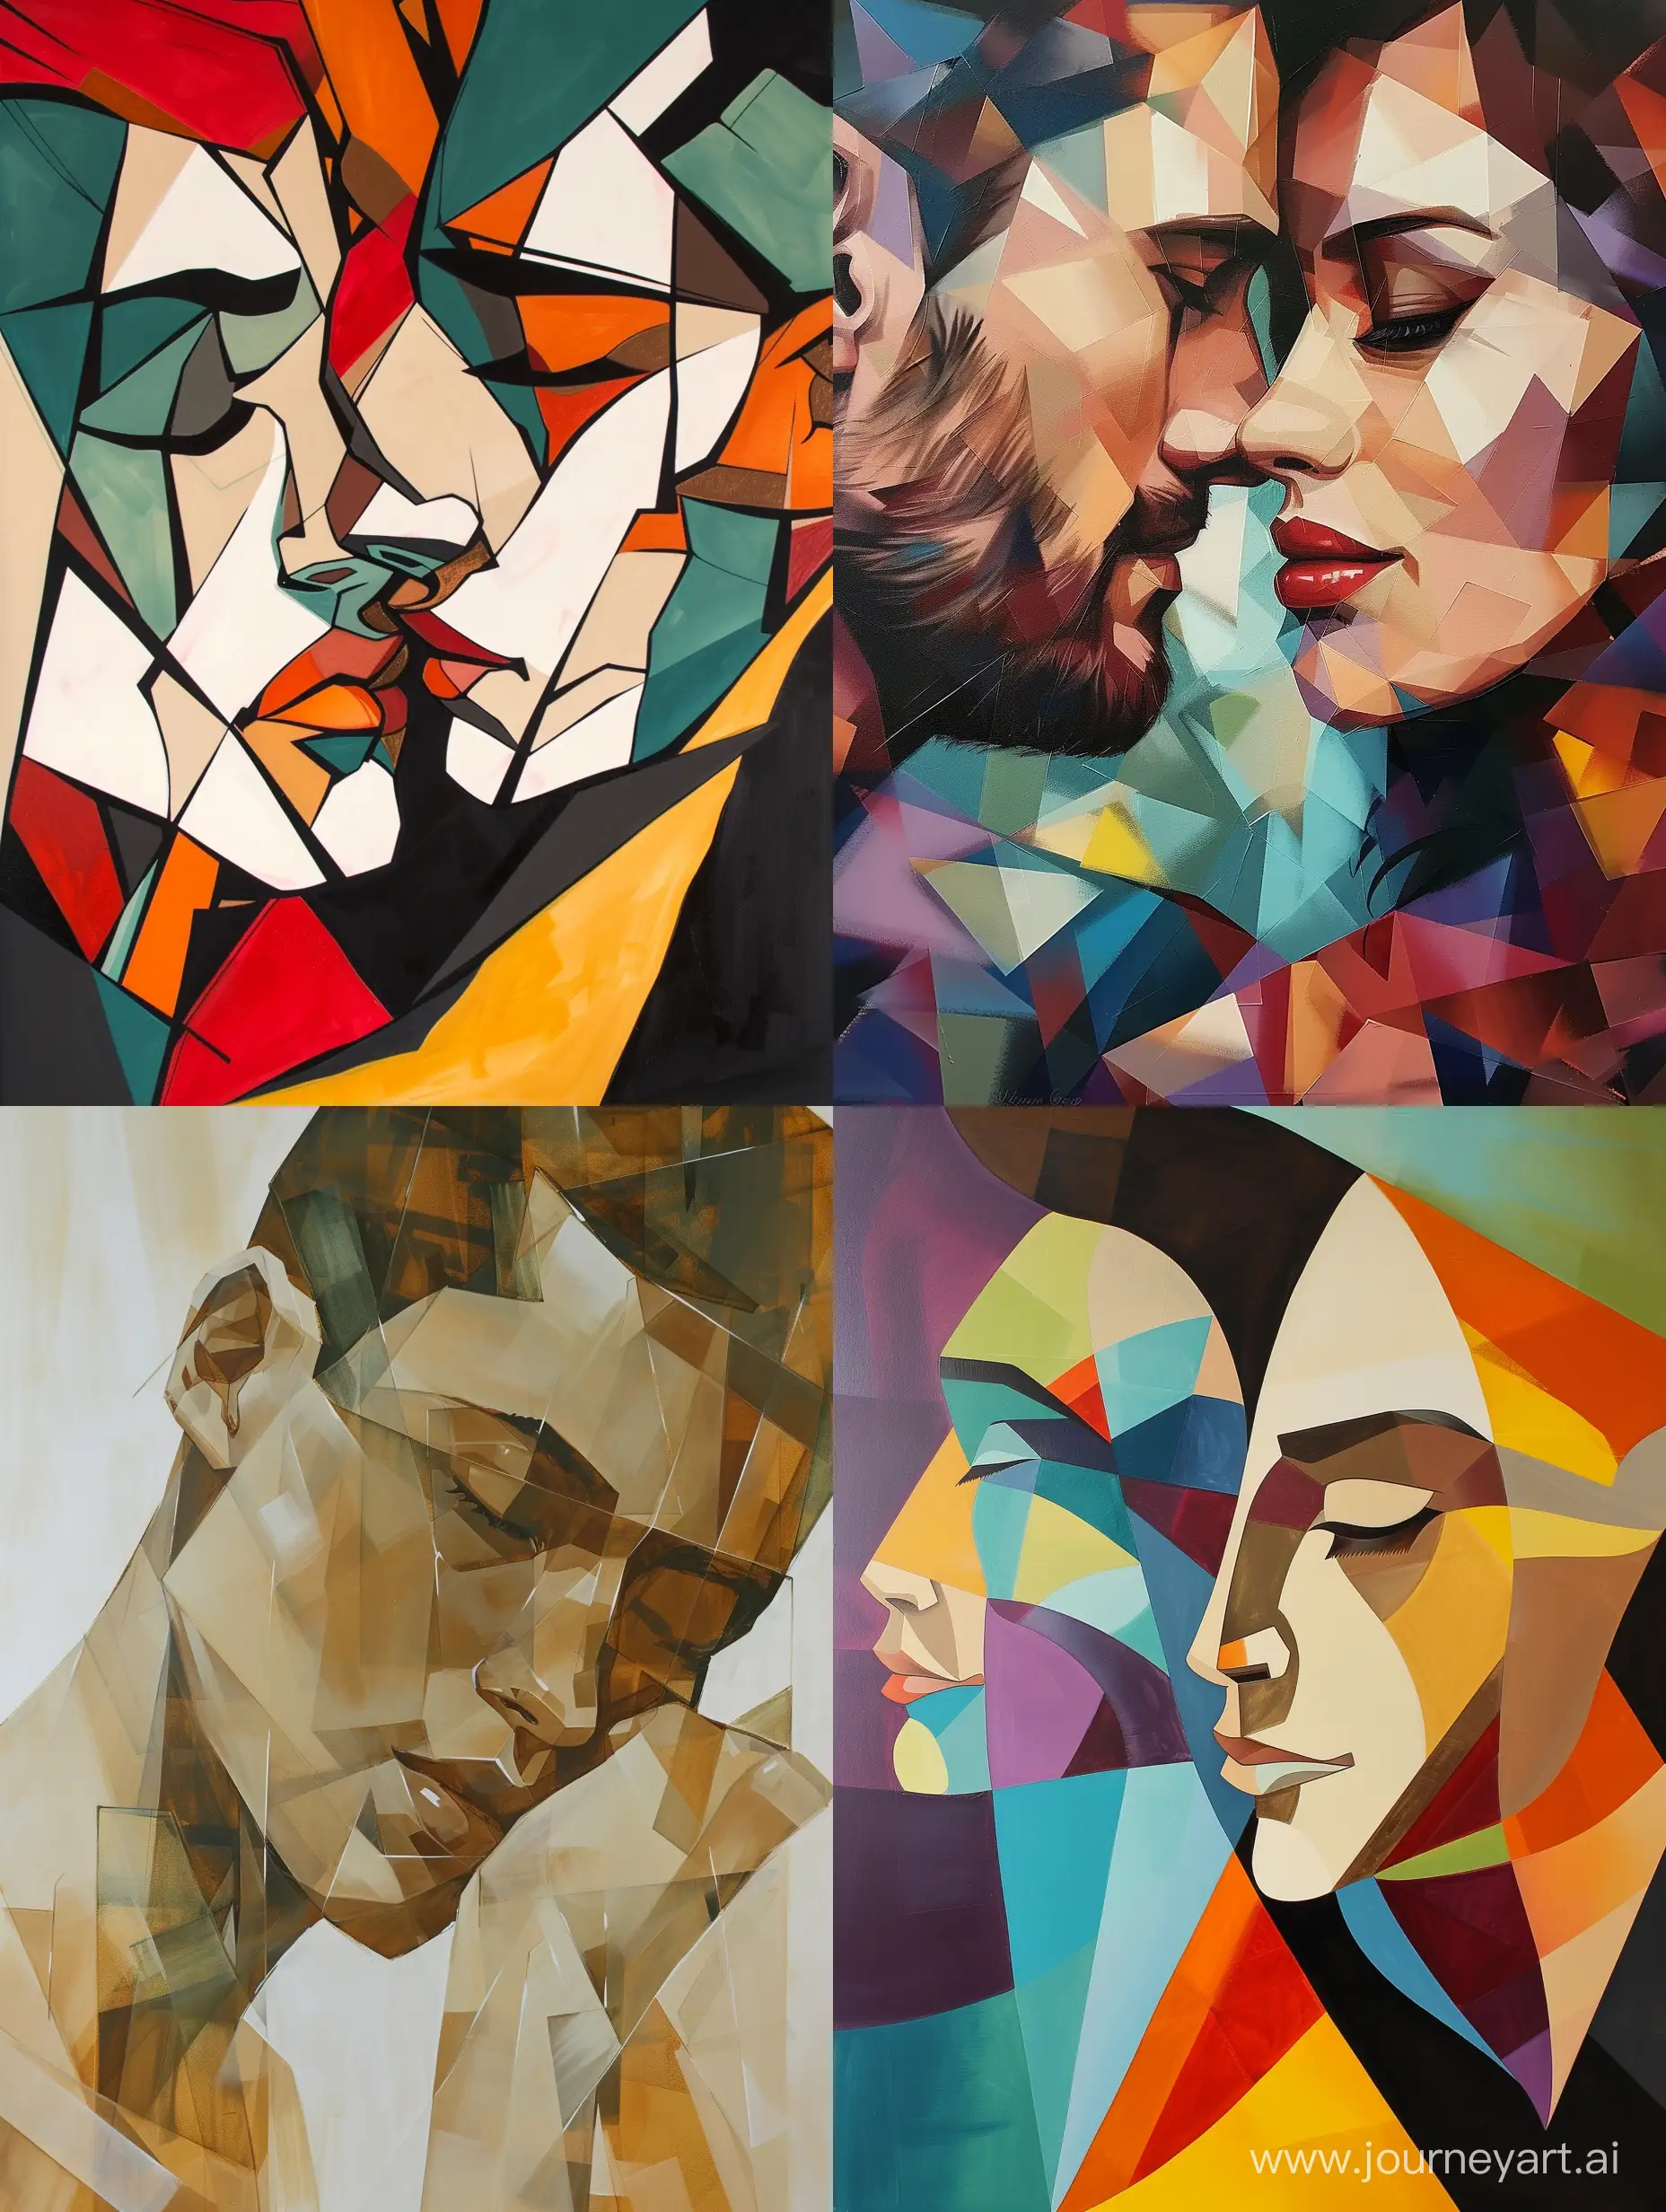 Abstract-Geometric-Art-Dynamic-Interaction-of-Man-and-Beautiful-Woman-with-Tons-of-Acrylic